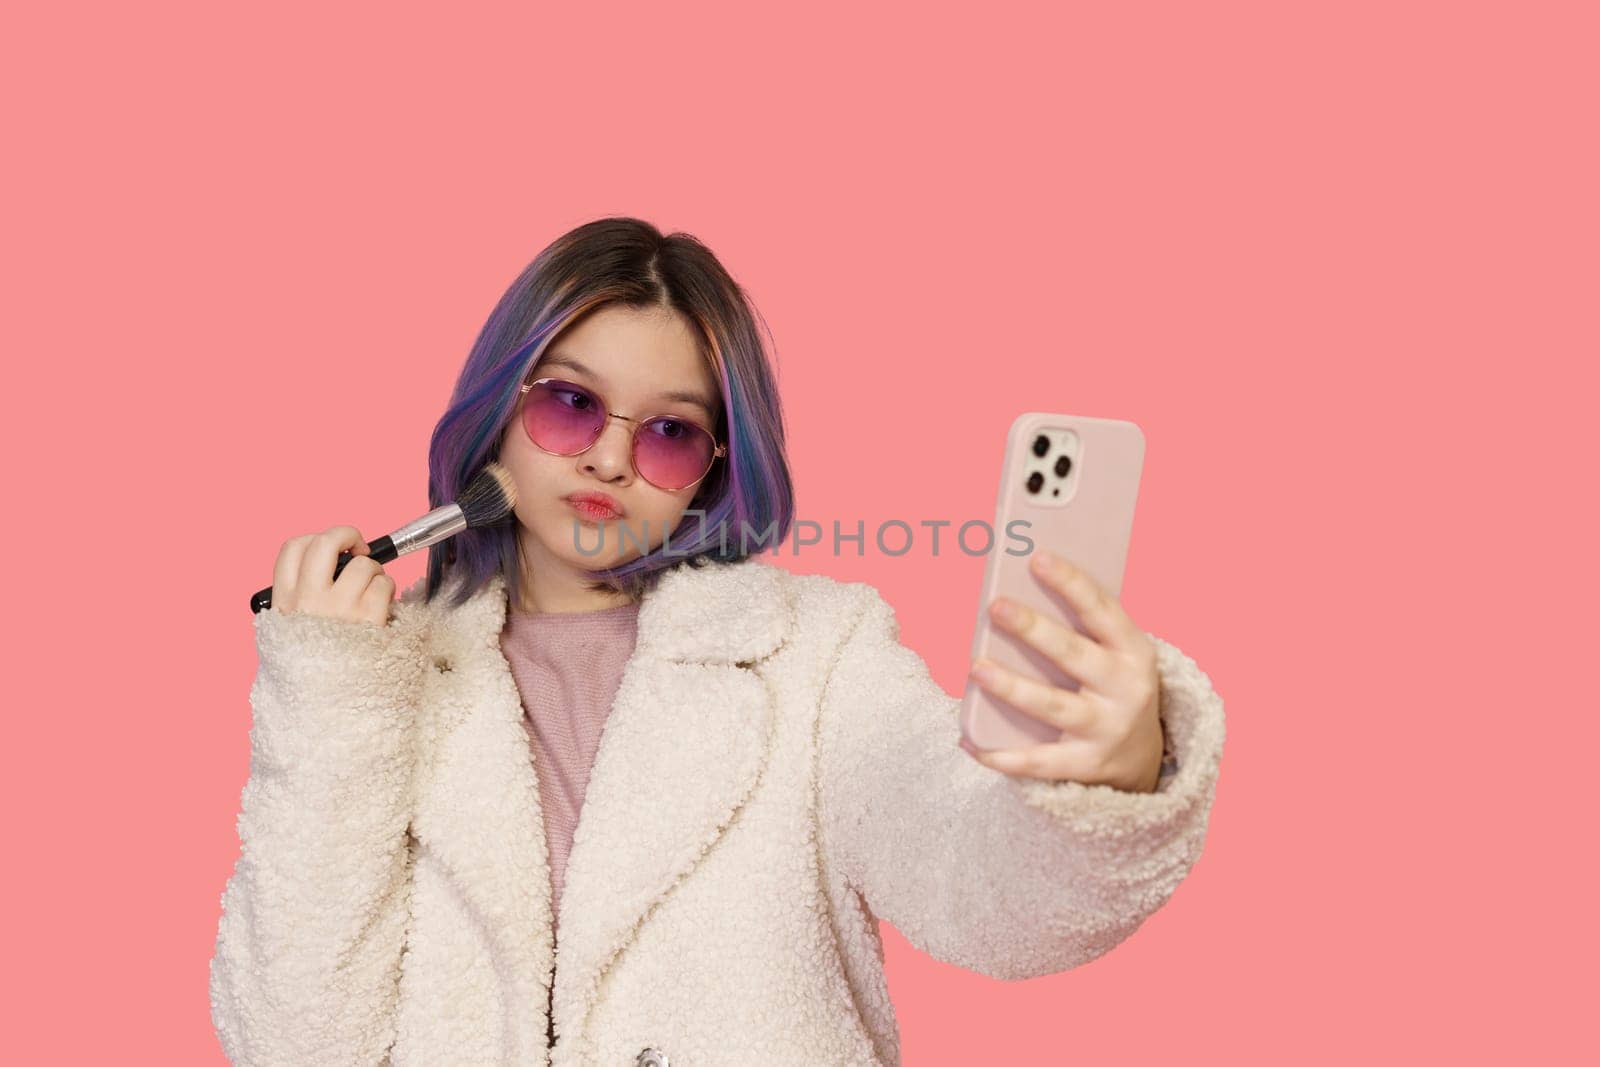 Stylish Teenager Girl, In Modern Pink Glasses, Uses Mobile Phone As Mirror While Applying Makeup With Brush Against Pink Background. Fashionable And Trendy Teenager Embracing Contemporary Beauty Practices.High quality photo